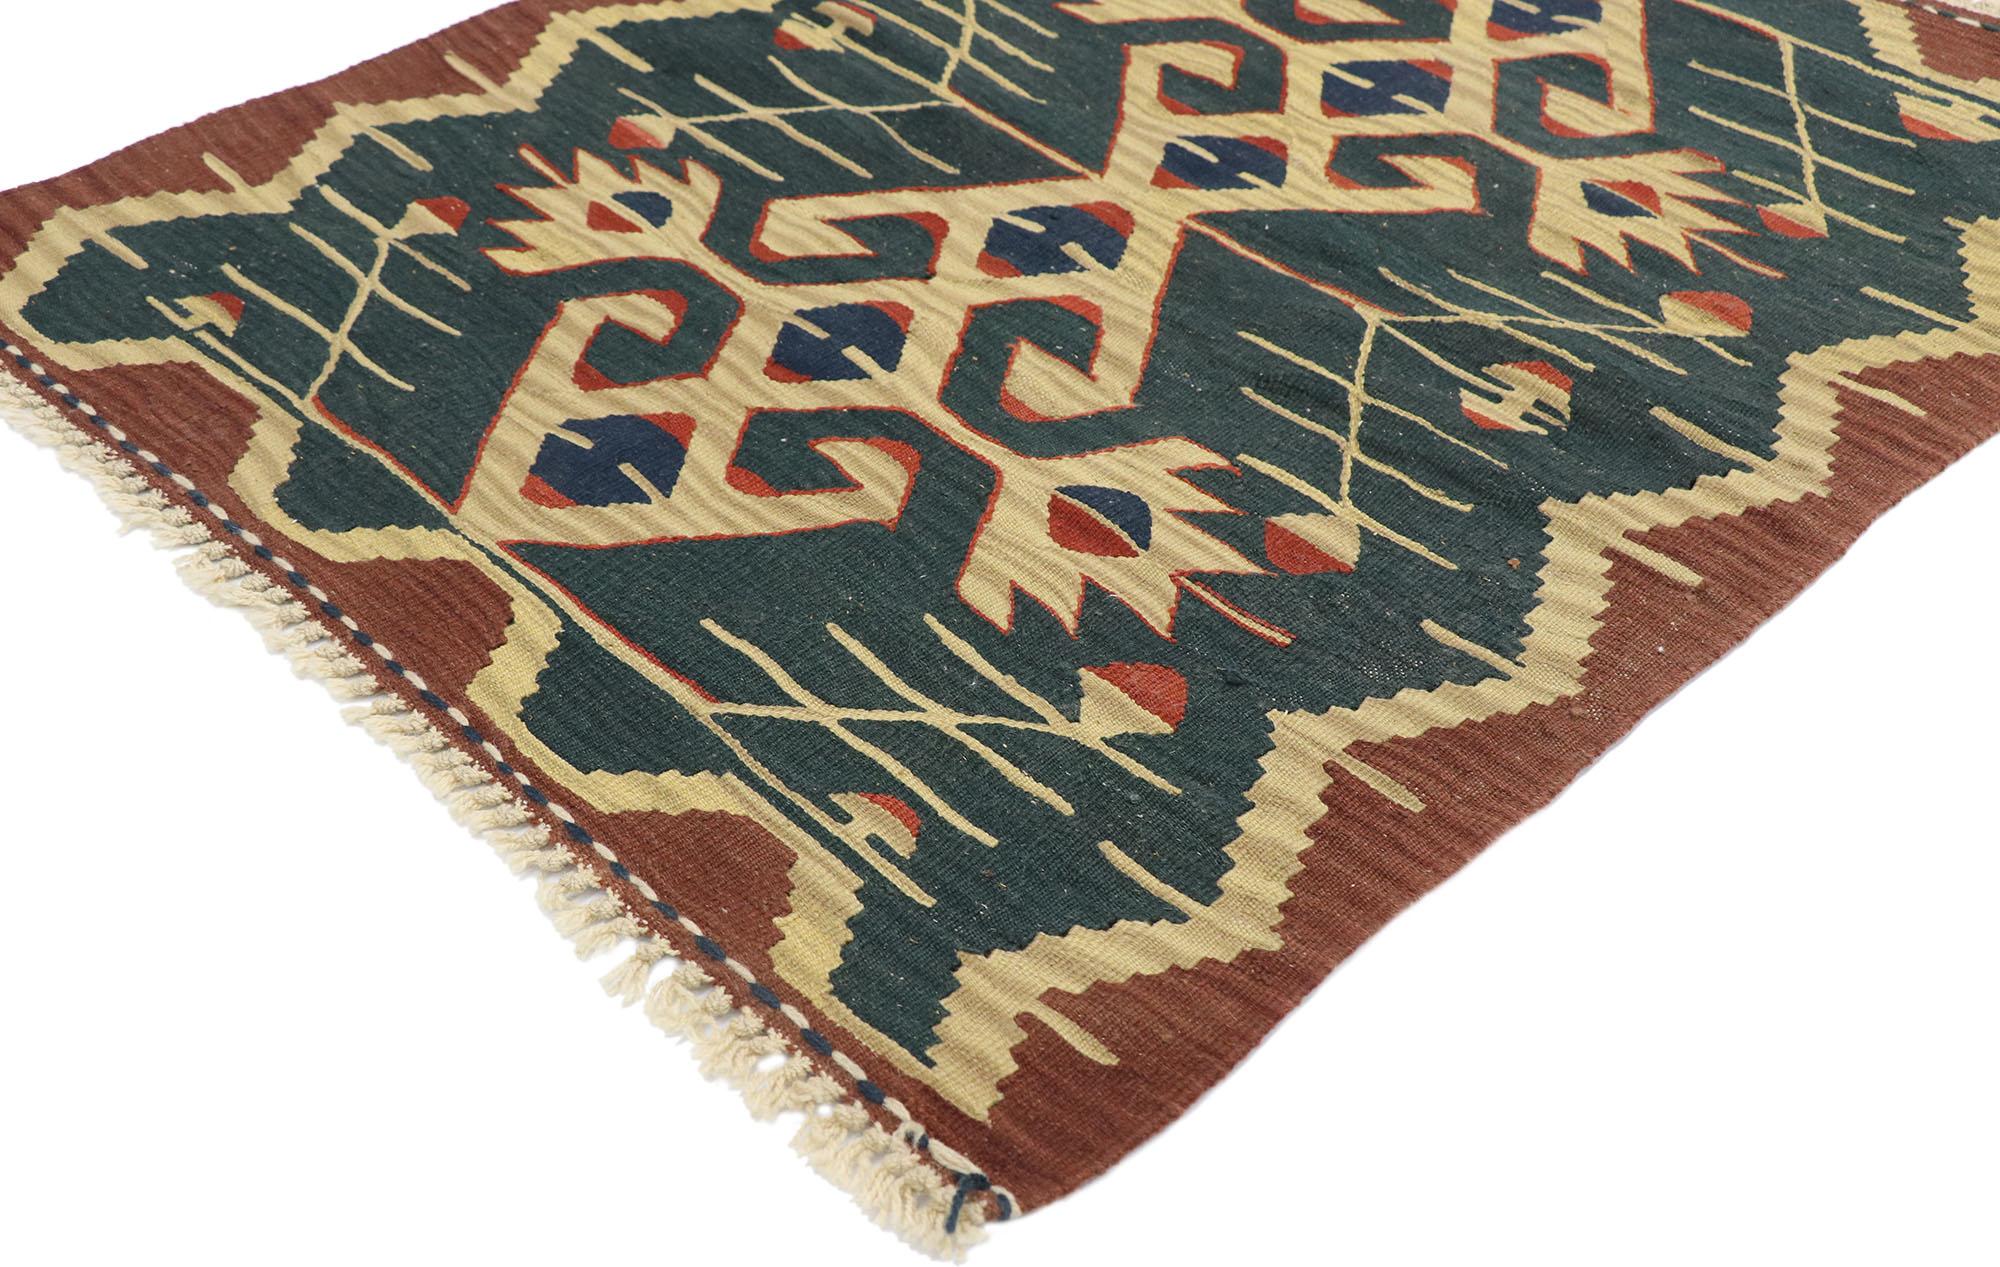 77851, vintage Persian Shiraz Kilim rug with Tribal style. Full of tiny details and a bold expressive design combined with vibrant colors and tribal style, this hand-woven wool vintage Persian Shiraz kilim rug is a captivating vision of woven